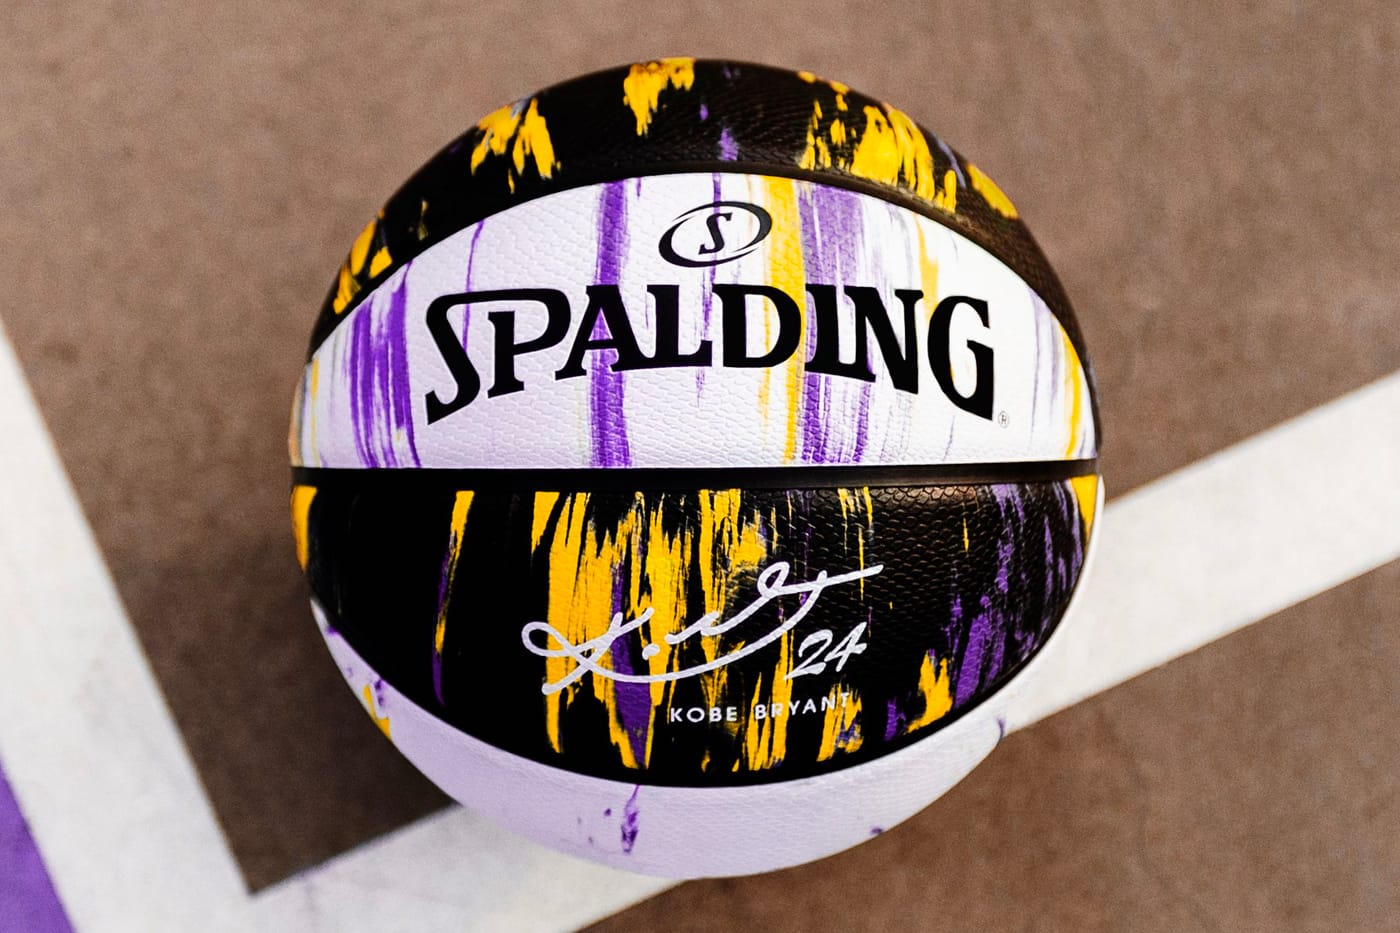 Spalding Kobe Bryant 24 Marbled Snake Limited Edition Basketball Rare Sold Out! 